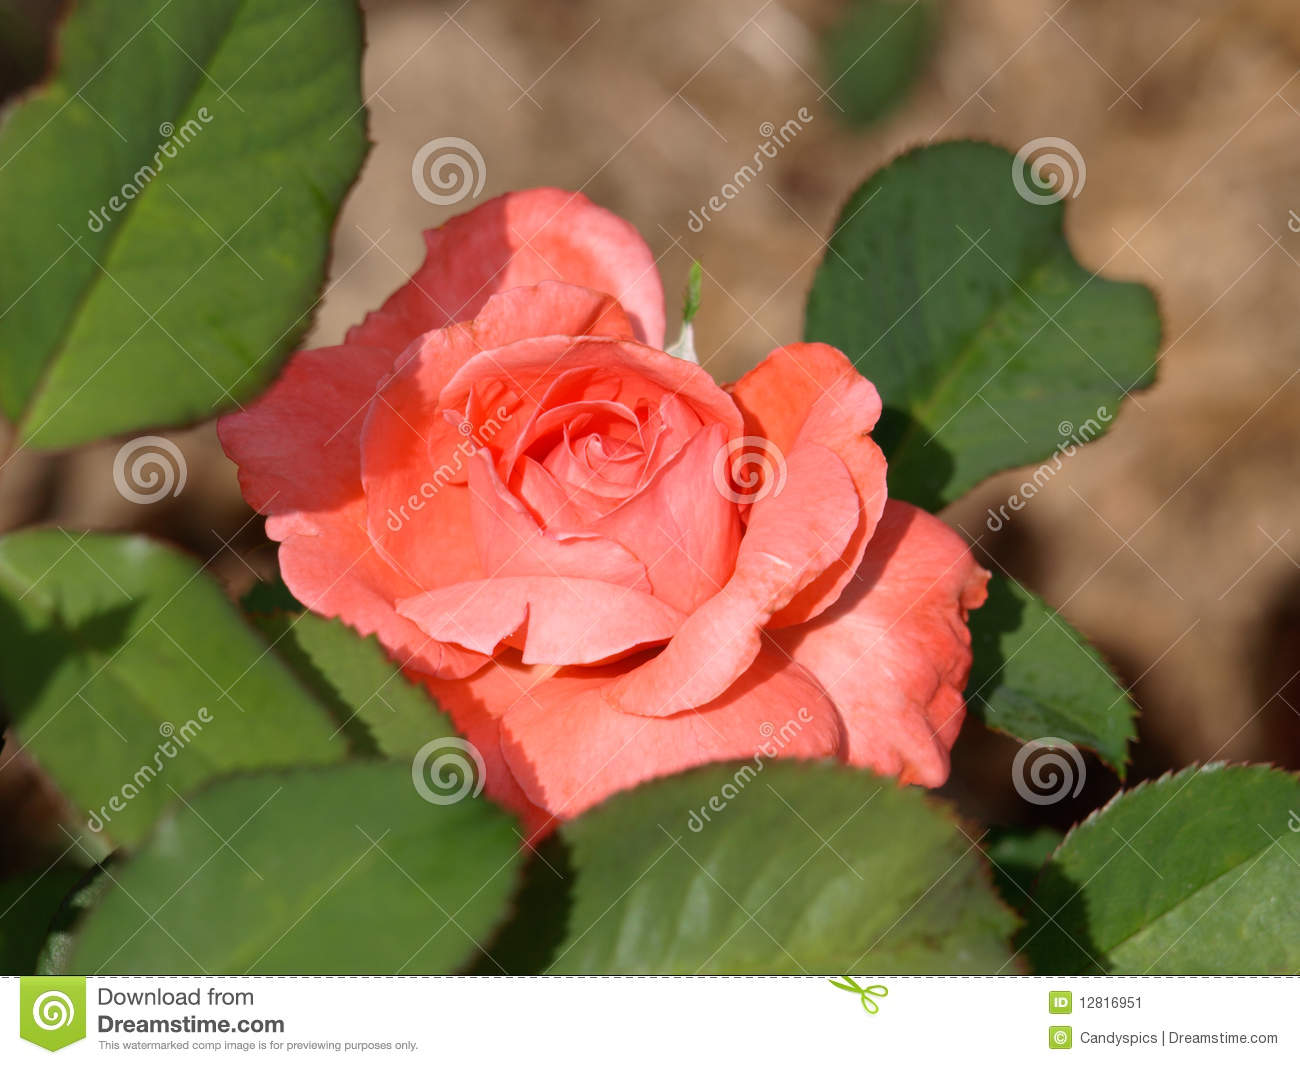 Peach Rose In The Garden   Beauty In Nature 